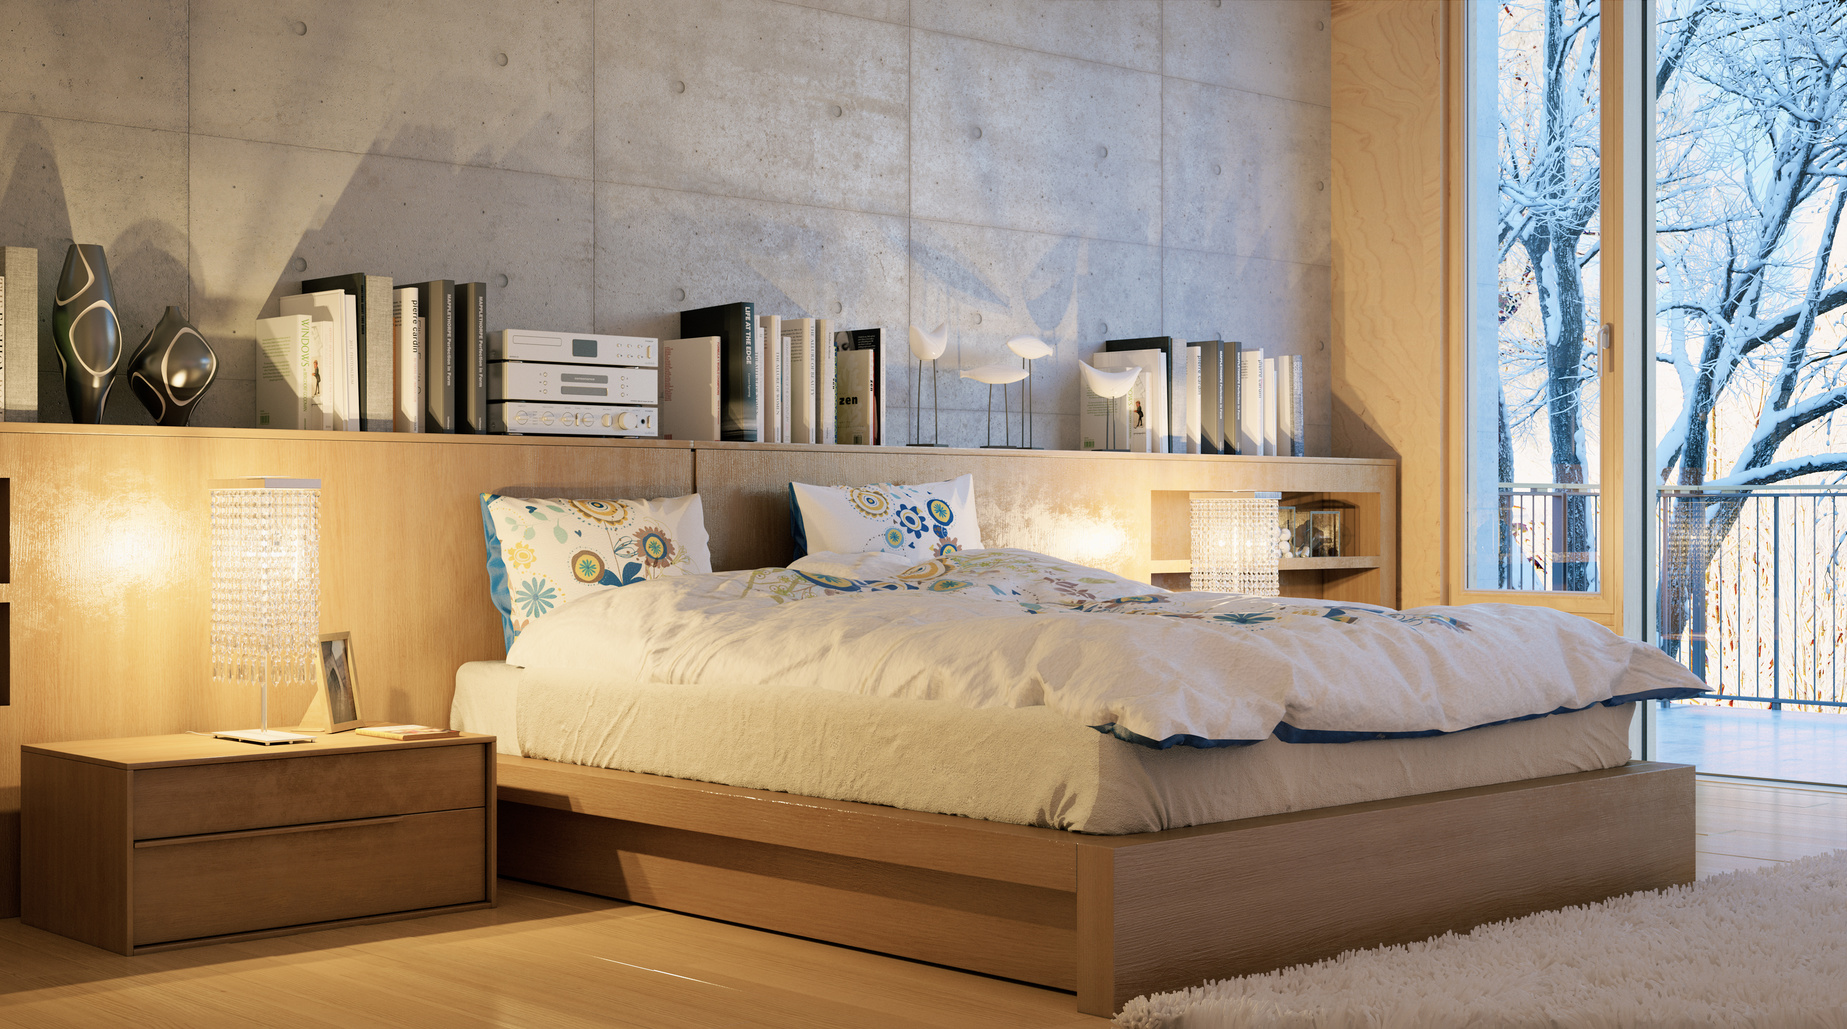 5 Bedroom Furniture Items to Complete a Bedroom